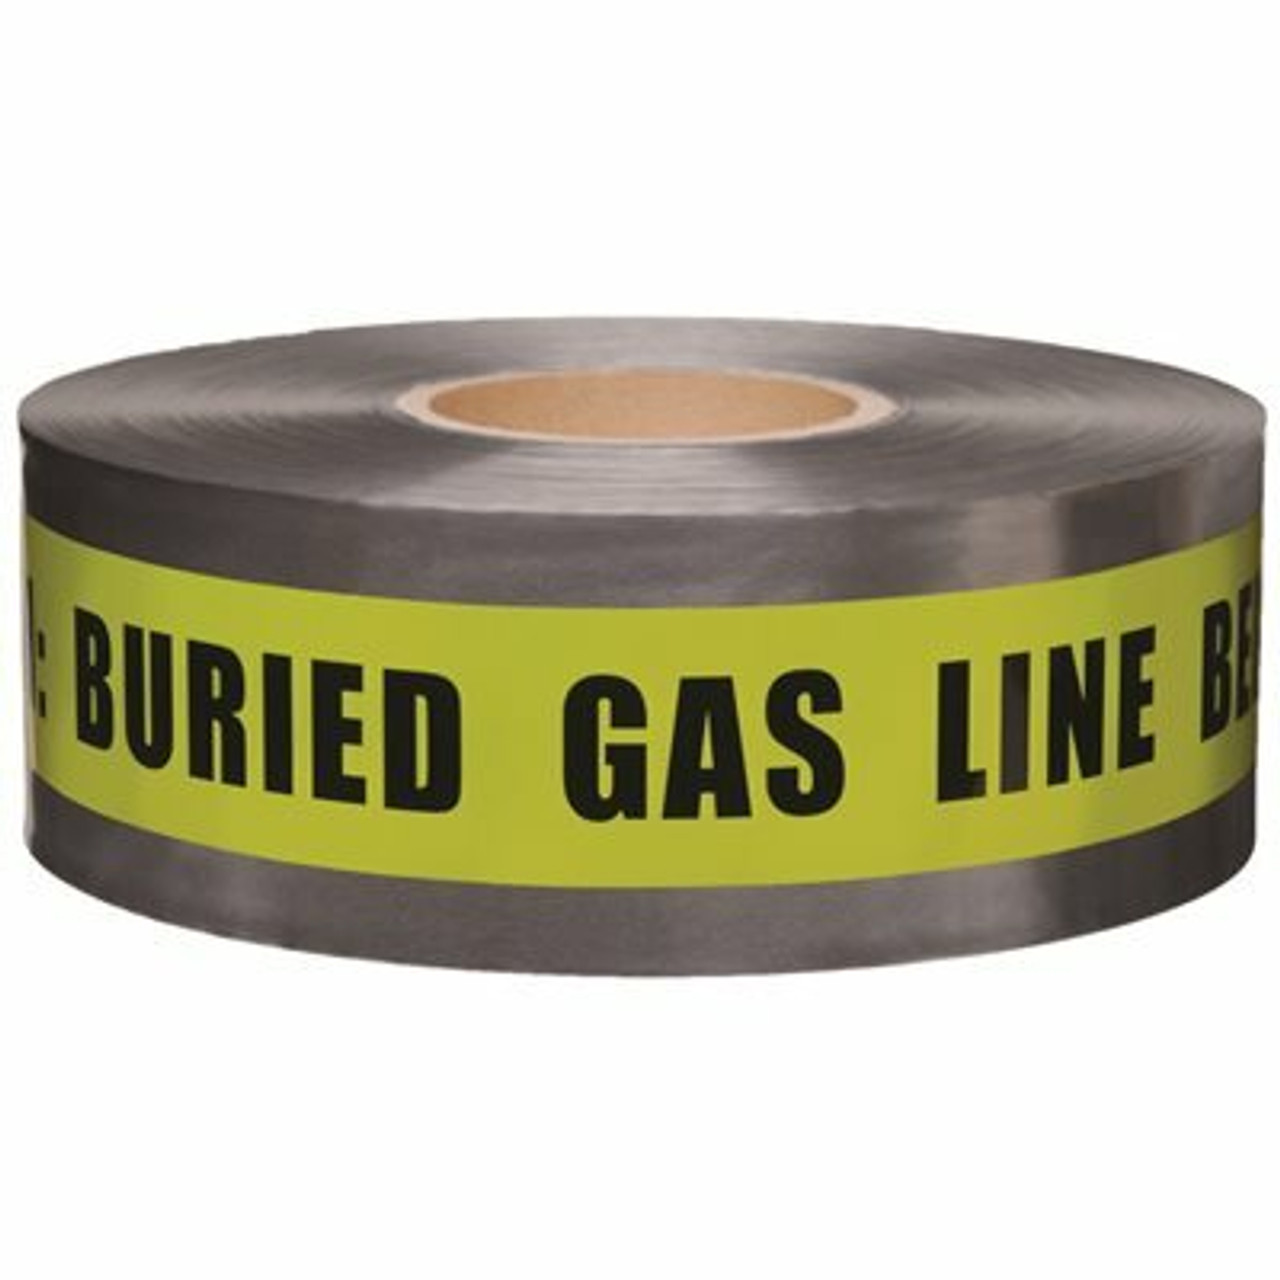 In Stock Now Detectable Marking Tape 3 In. X 333.33 Yd. Yellow Replaces Mt1000